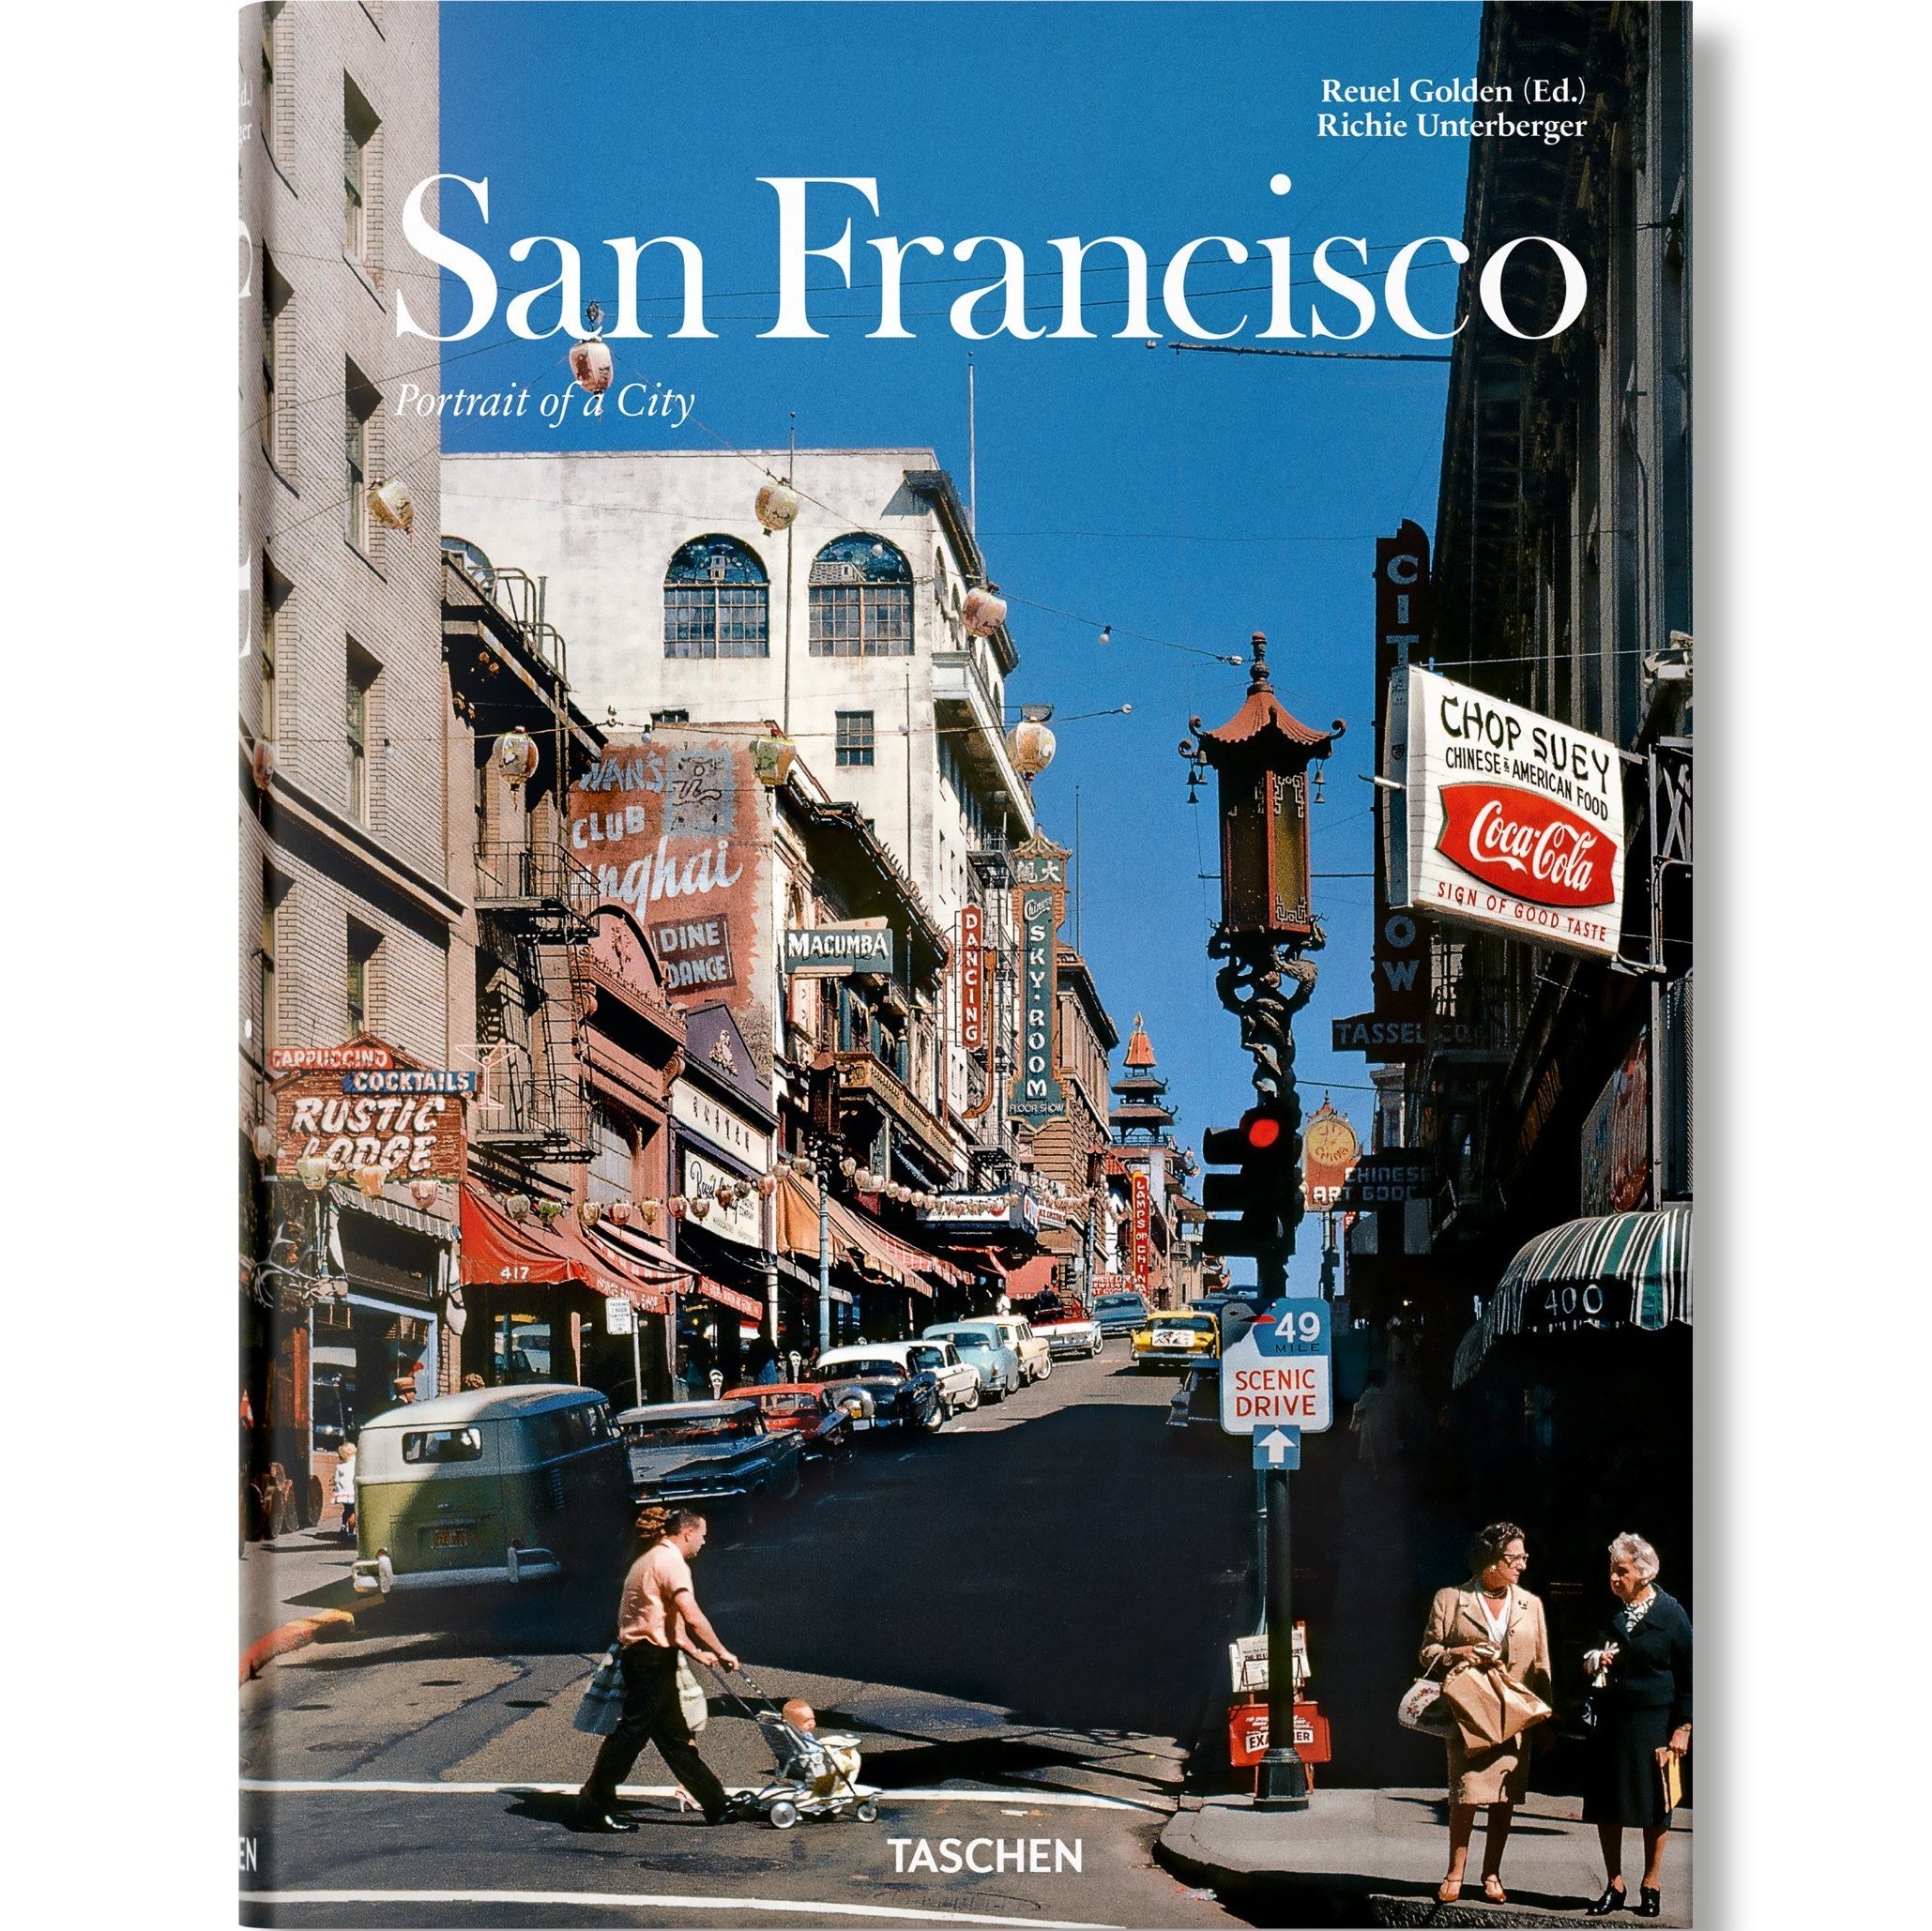 San Francisco, Portrait of a City Coffee Table Book